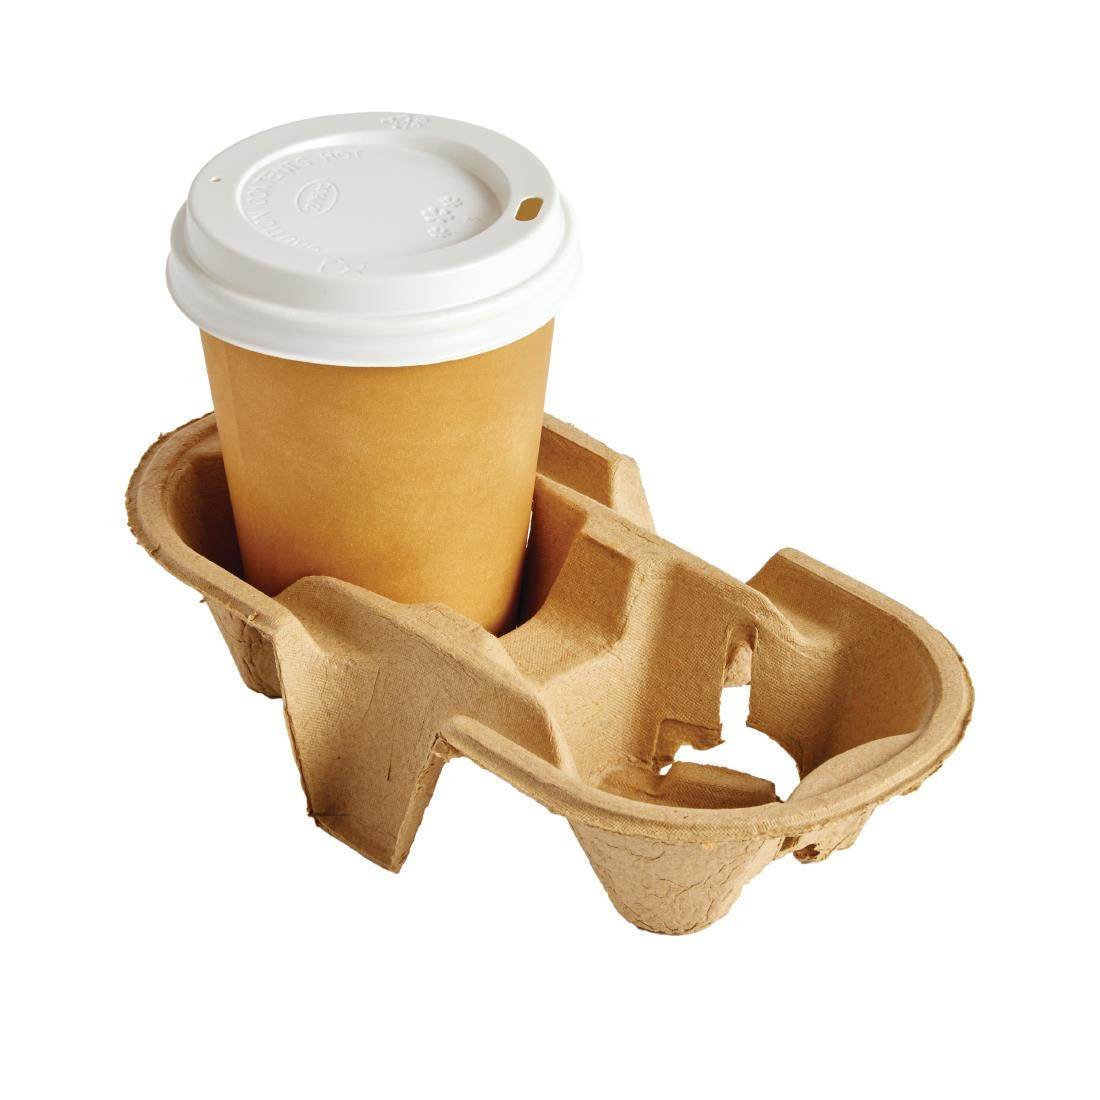 NISBETS 2 CUP DRINKS HOLDER x 320CE381